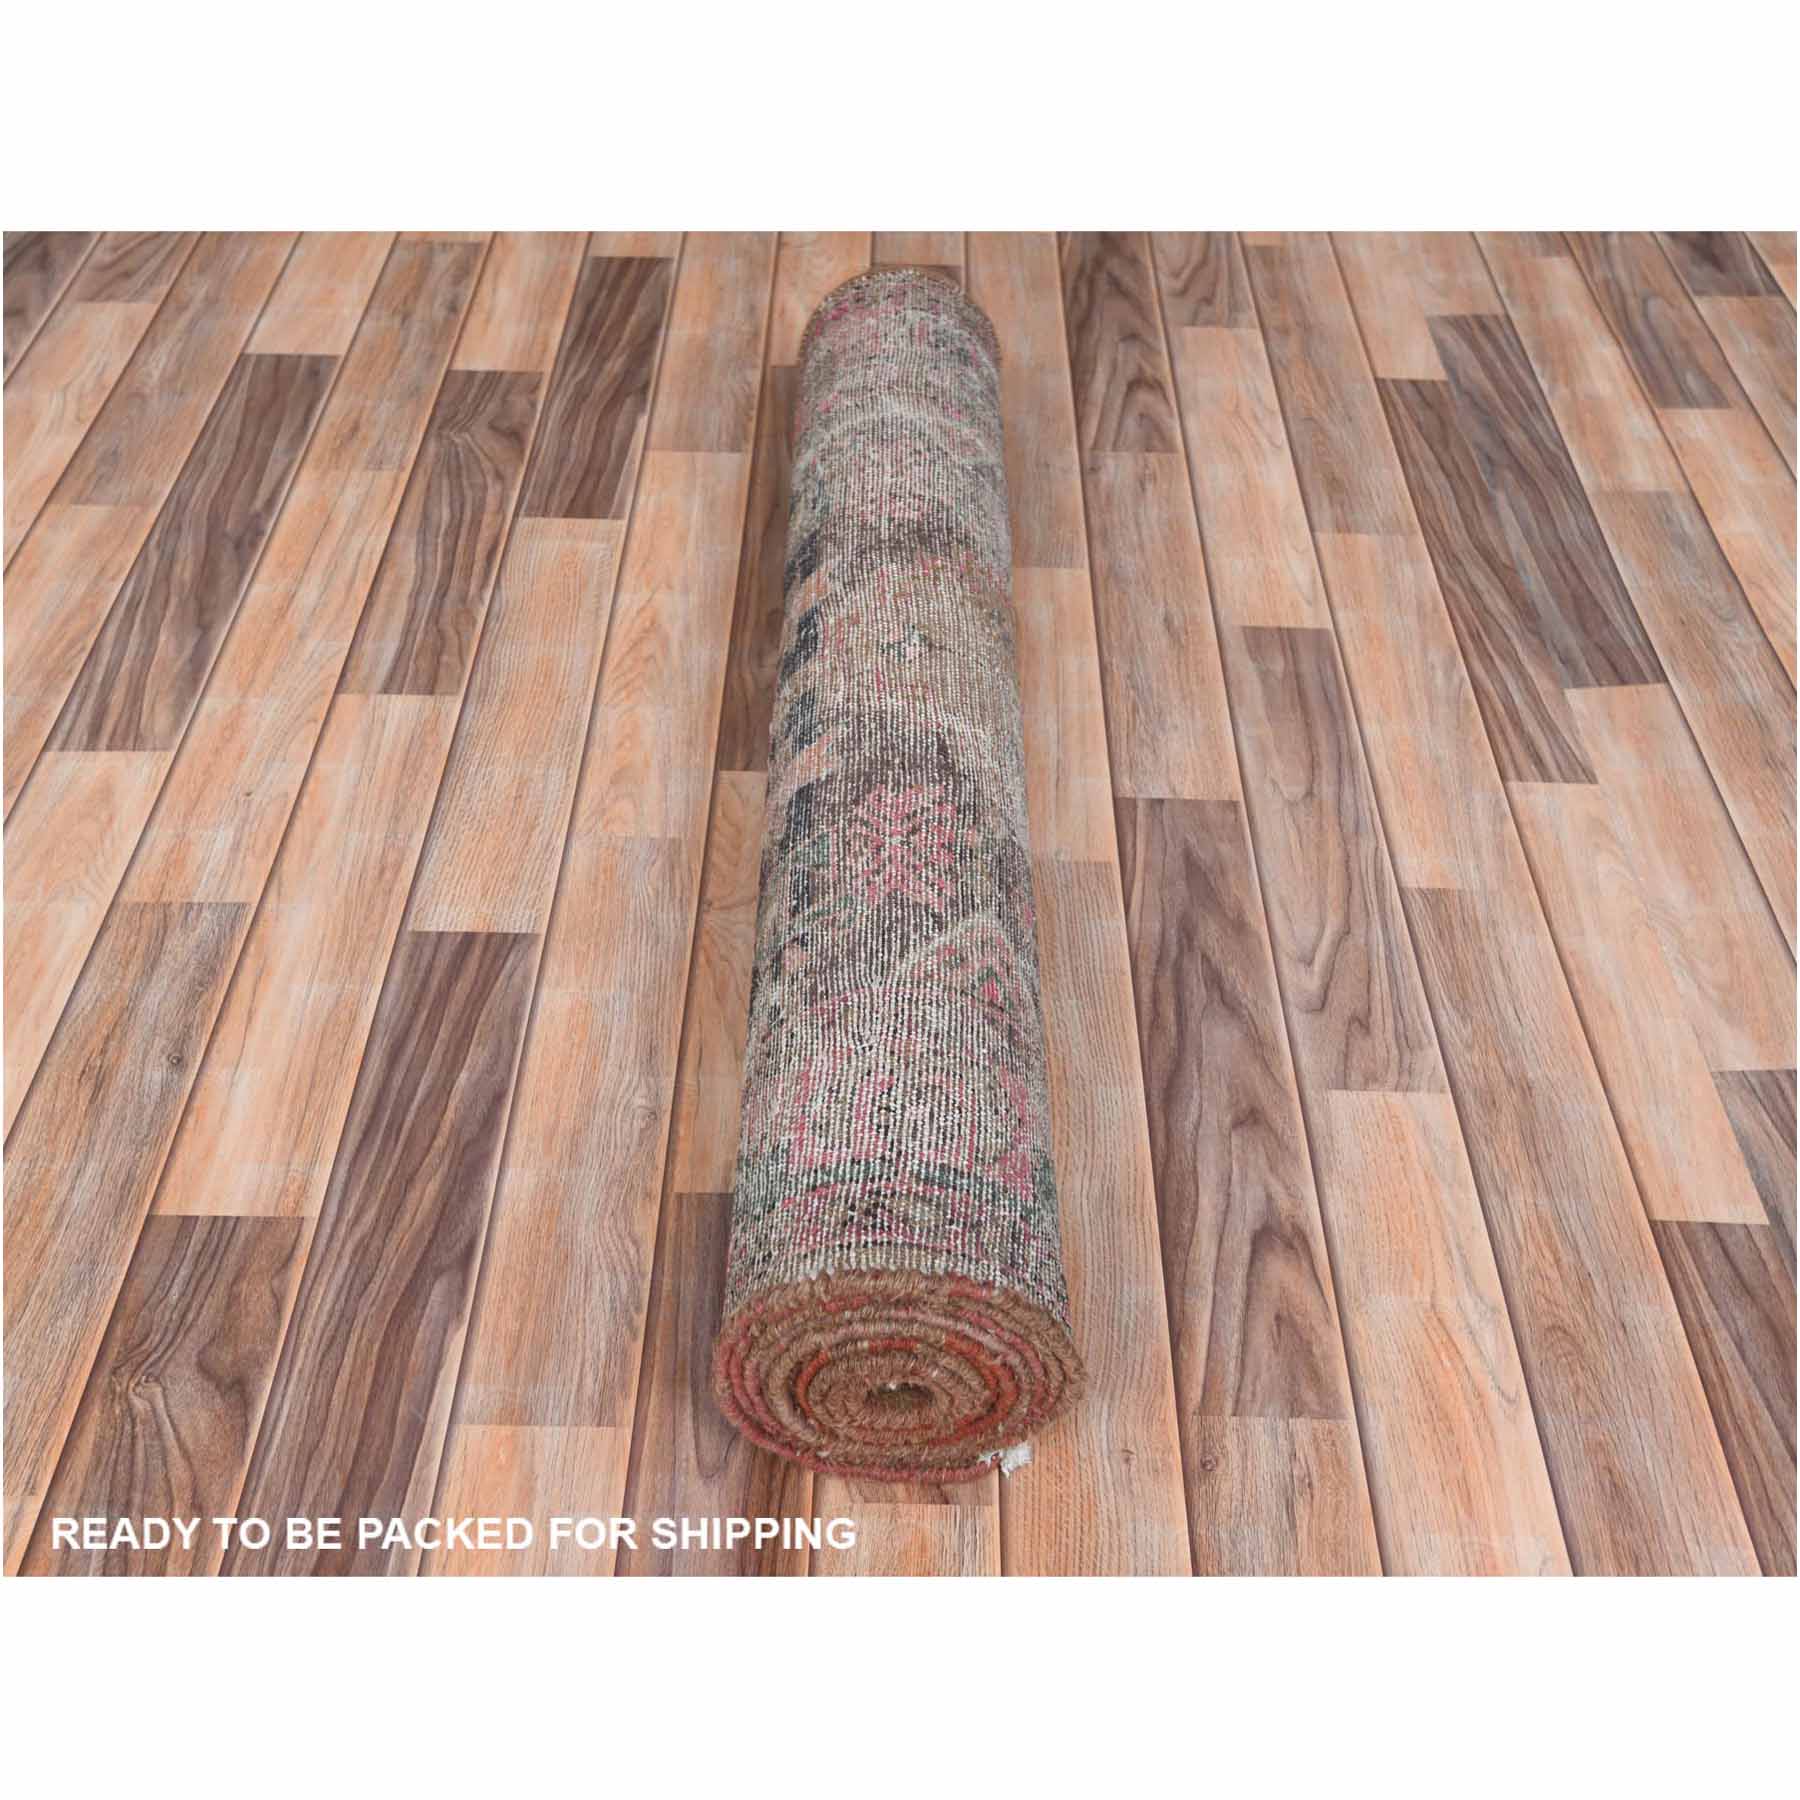 Overdyed-Vintage-Hand-Knotted-Rug-309395